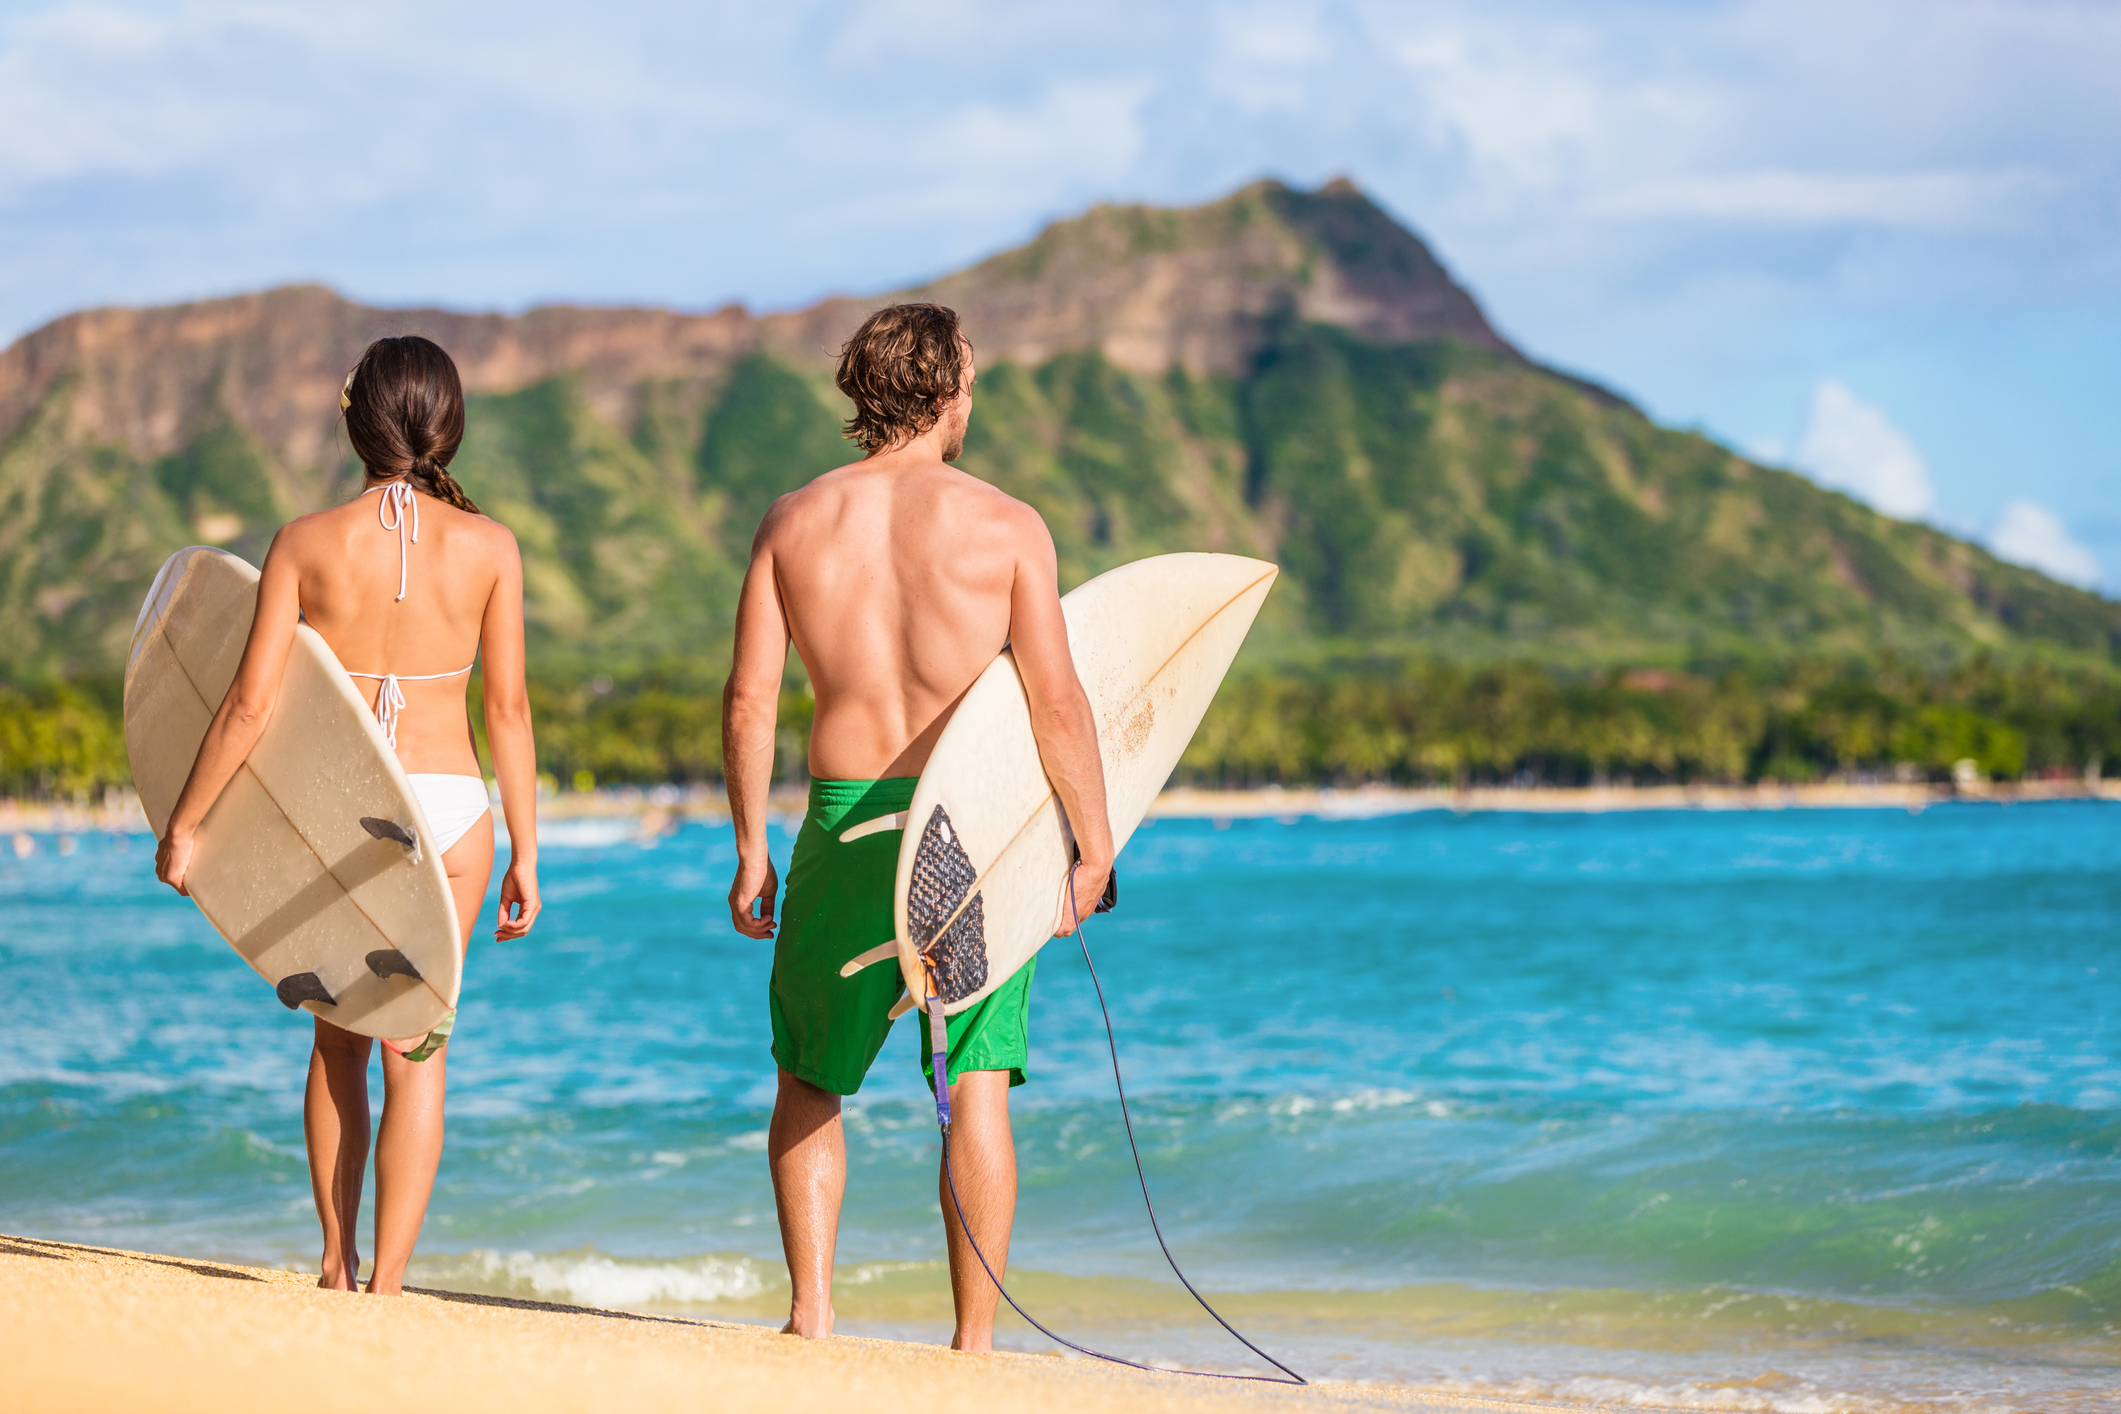 Save up to 30% in Hawaii!